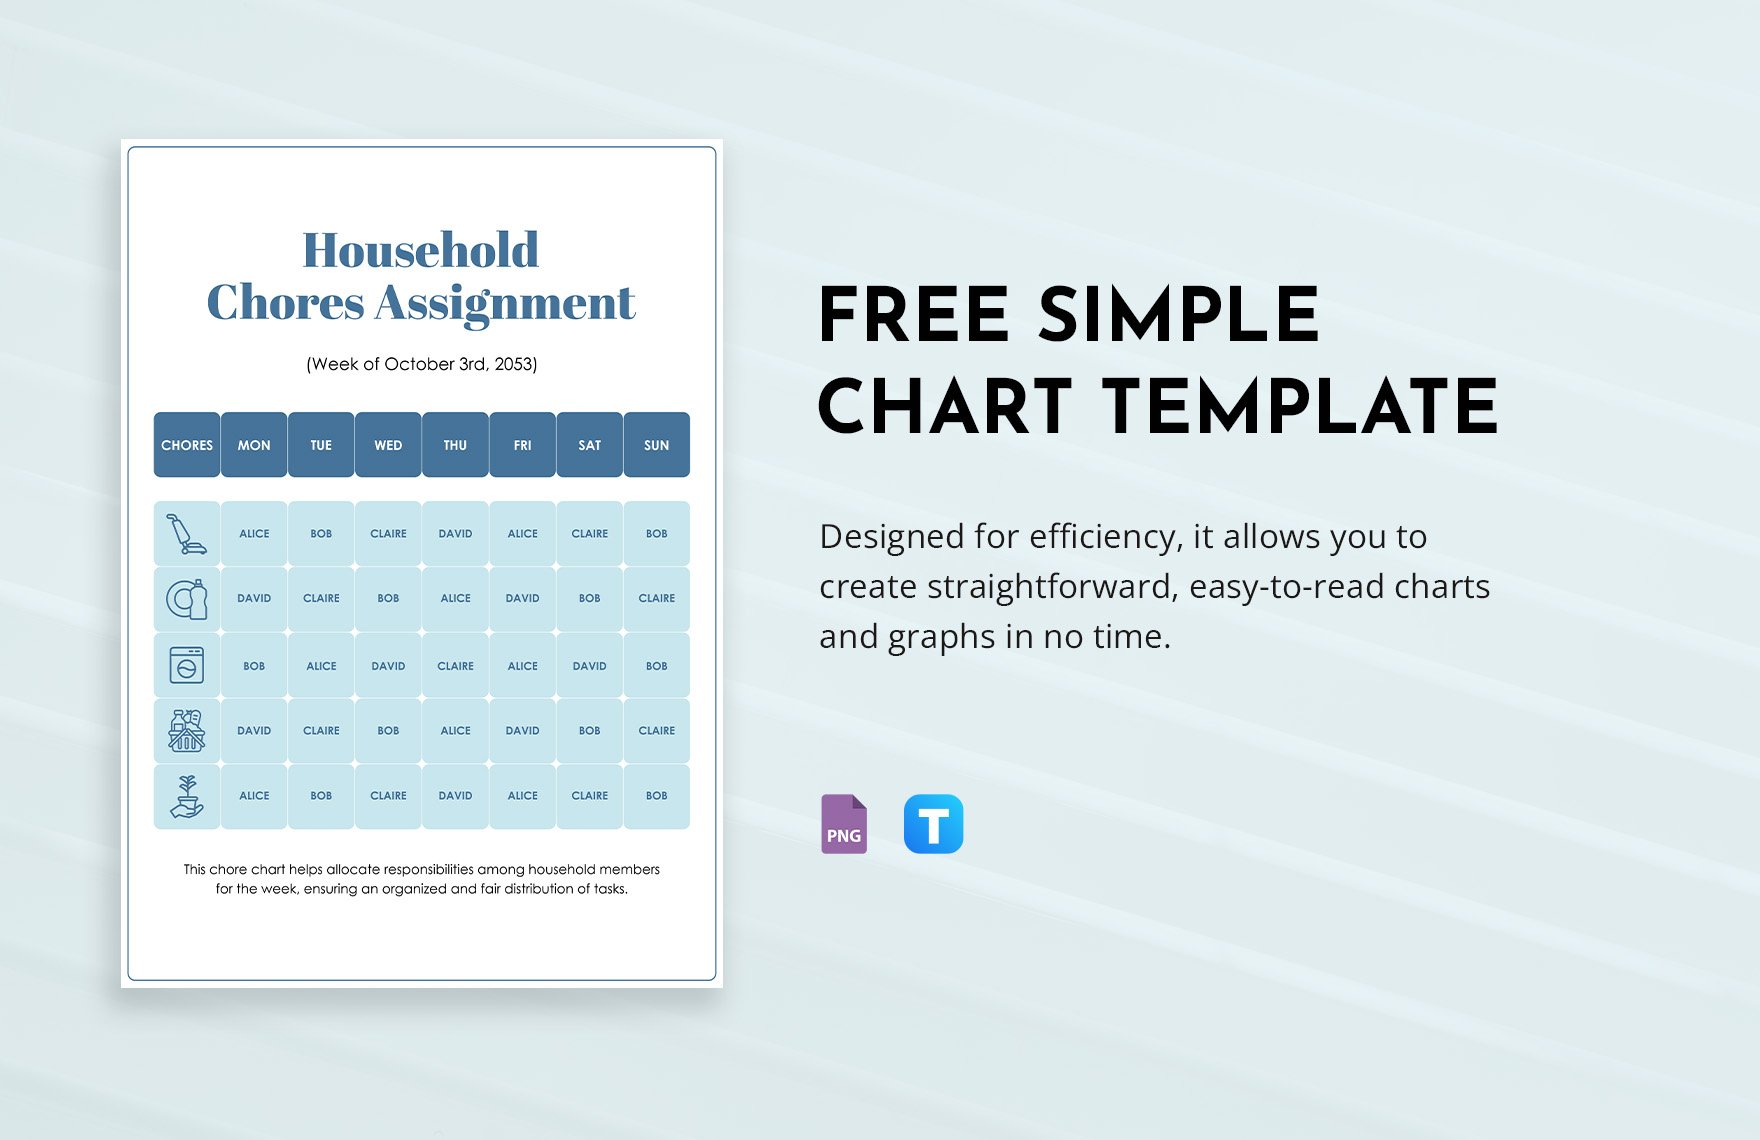 Free Simple Chart Template in PNG